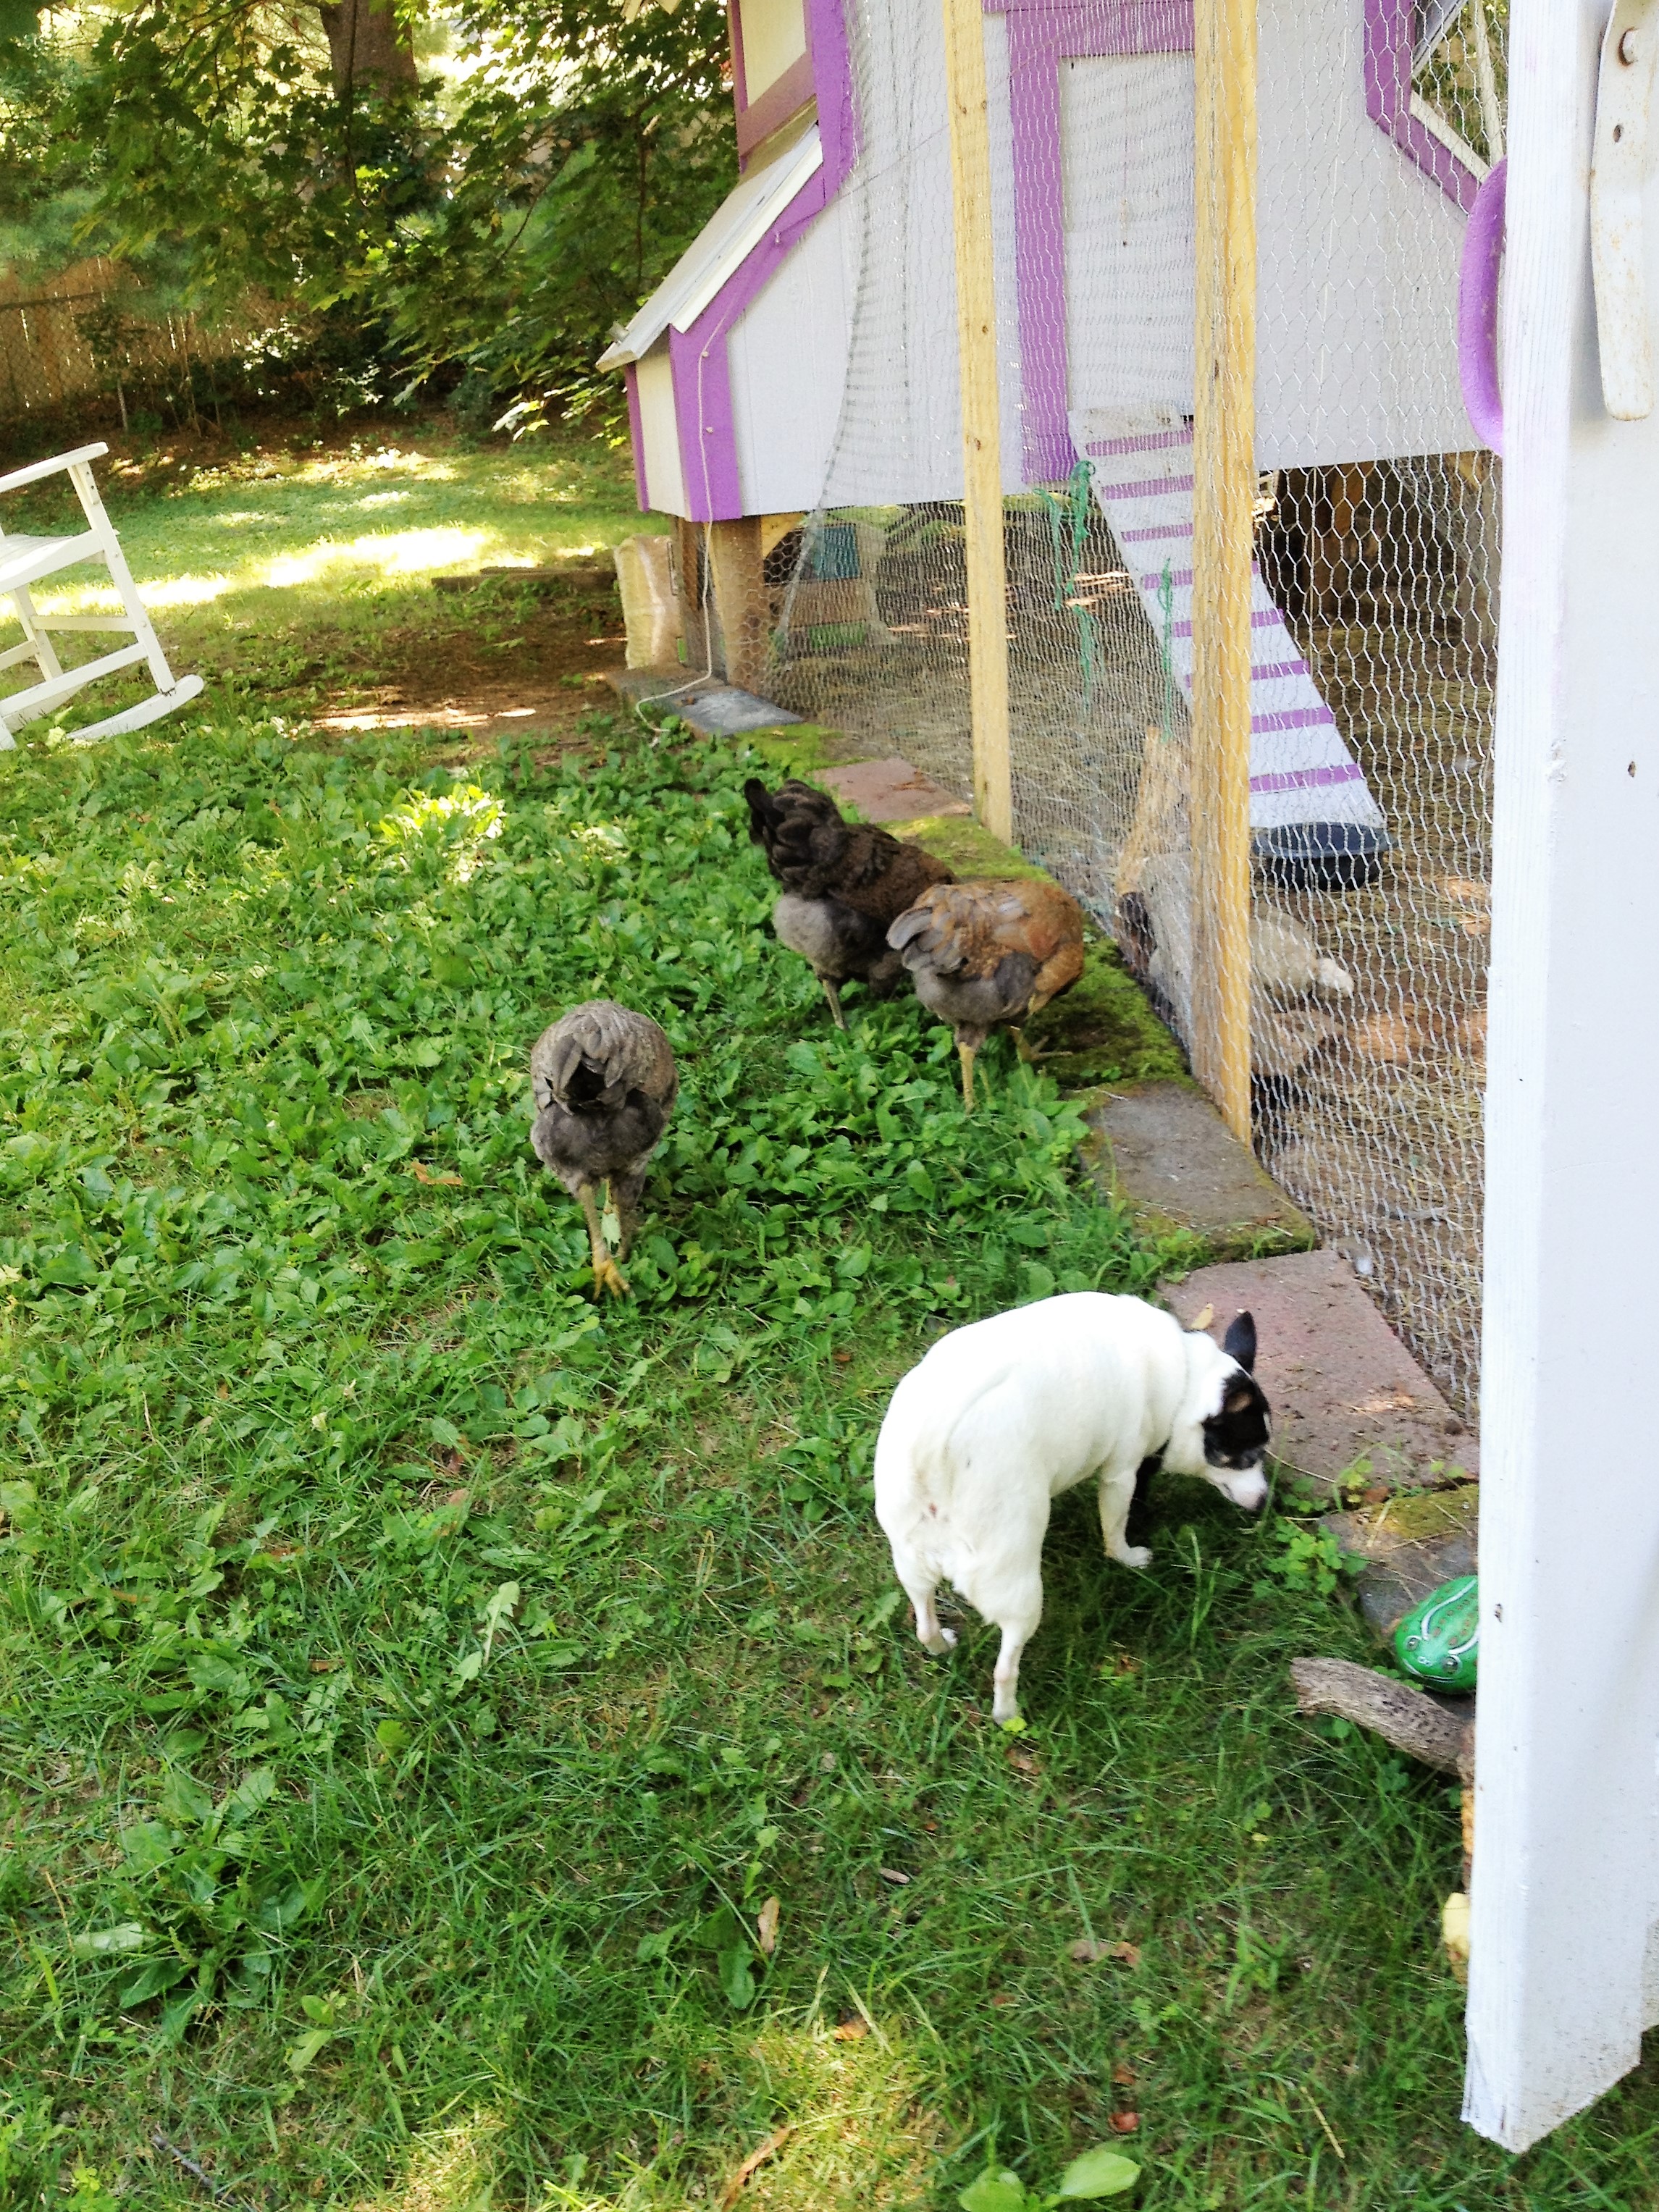 This was one of their first free ranging days. My Chihuahua decided to join the party.